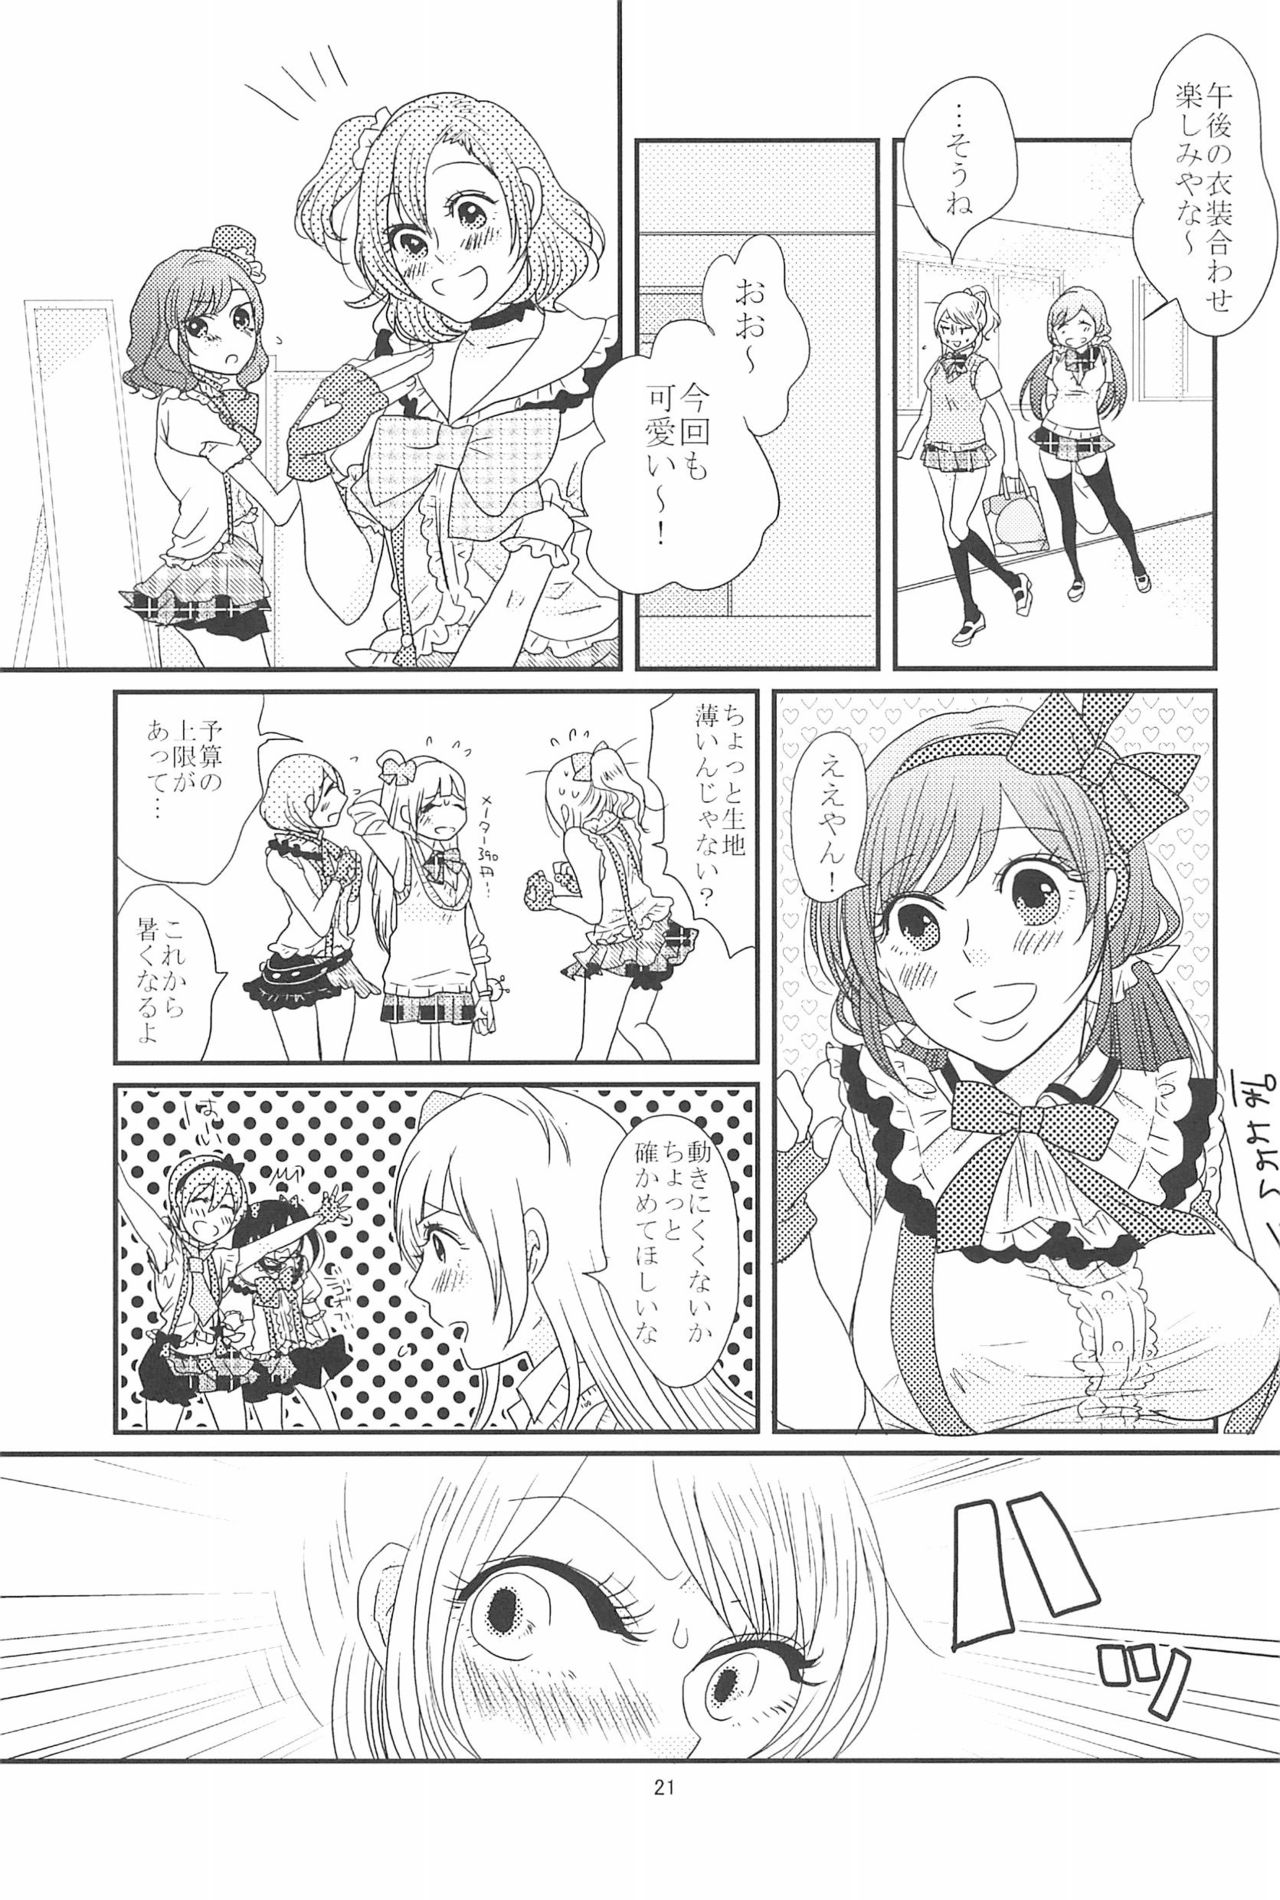 (C90) [BK*N2 (Mikawa Miso)] HAPPY GO LUCKY DAYS (Love Live!) page 25 full